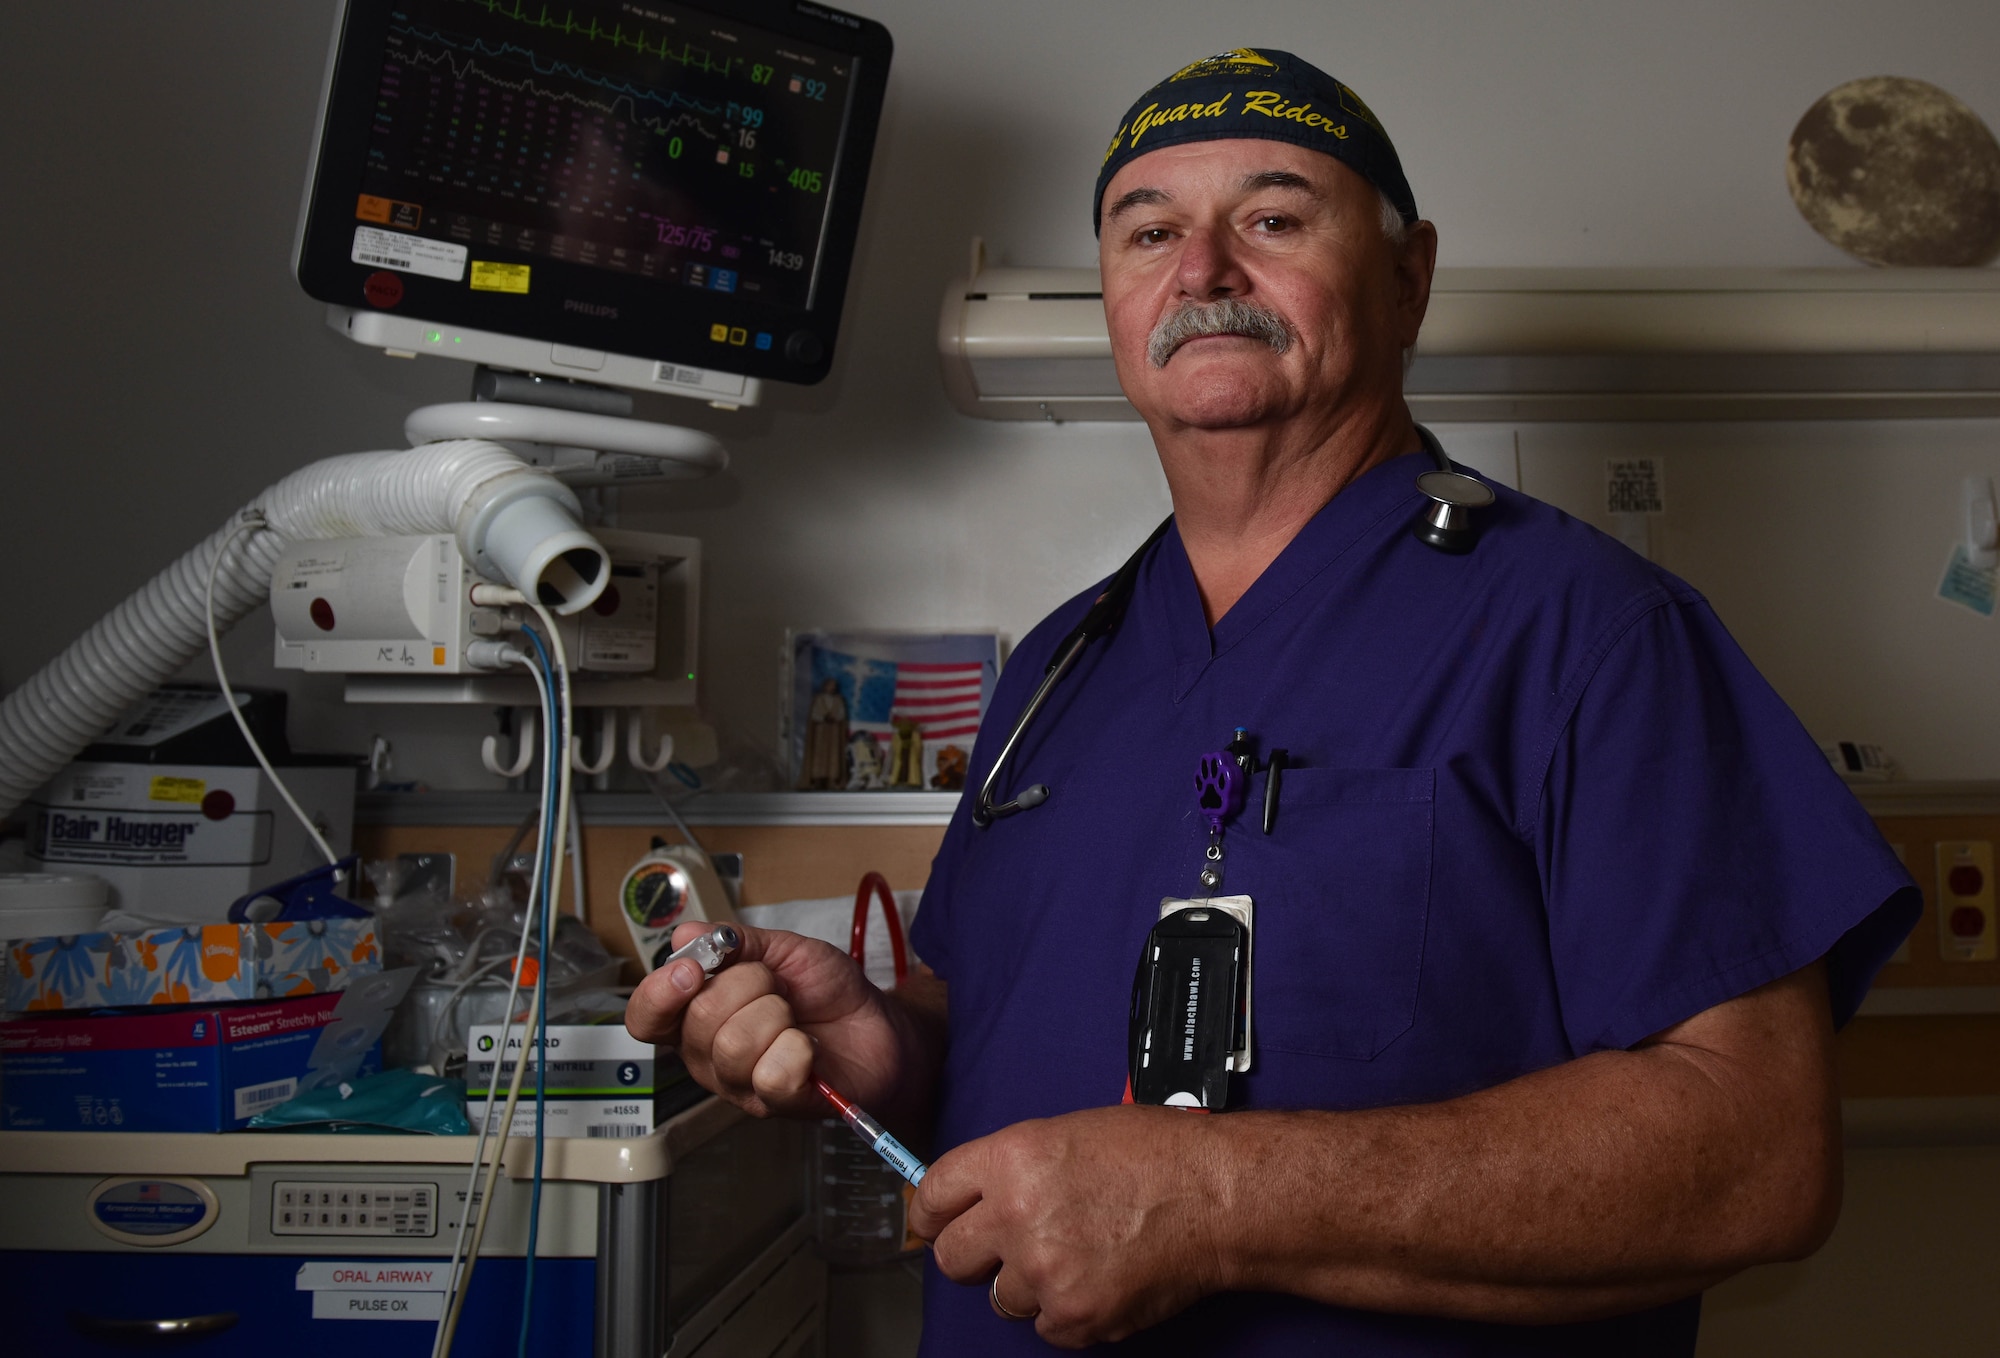 Jeffrey Barbour, 633rd Medical Group same day surgery and post anesthesia unit, monitors a patient's vitals at Joint Base Langley-Eustis, Virginia, Aug. 16, 2019. Barbour’s interest in medical care began when he was very young and joined the Fire Department. (U.S. Air Force photo by Airman 1st Class Sarah Dowe)